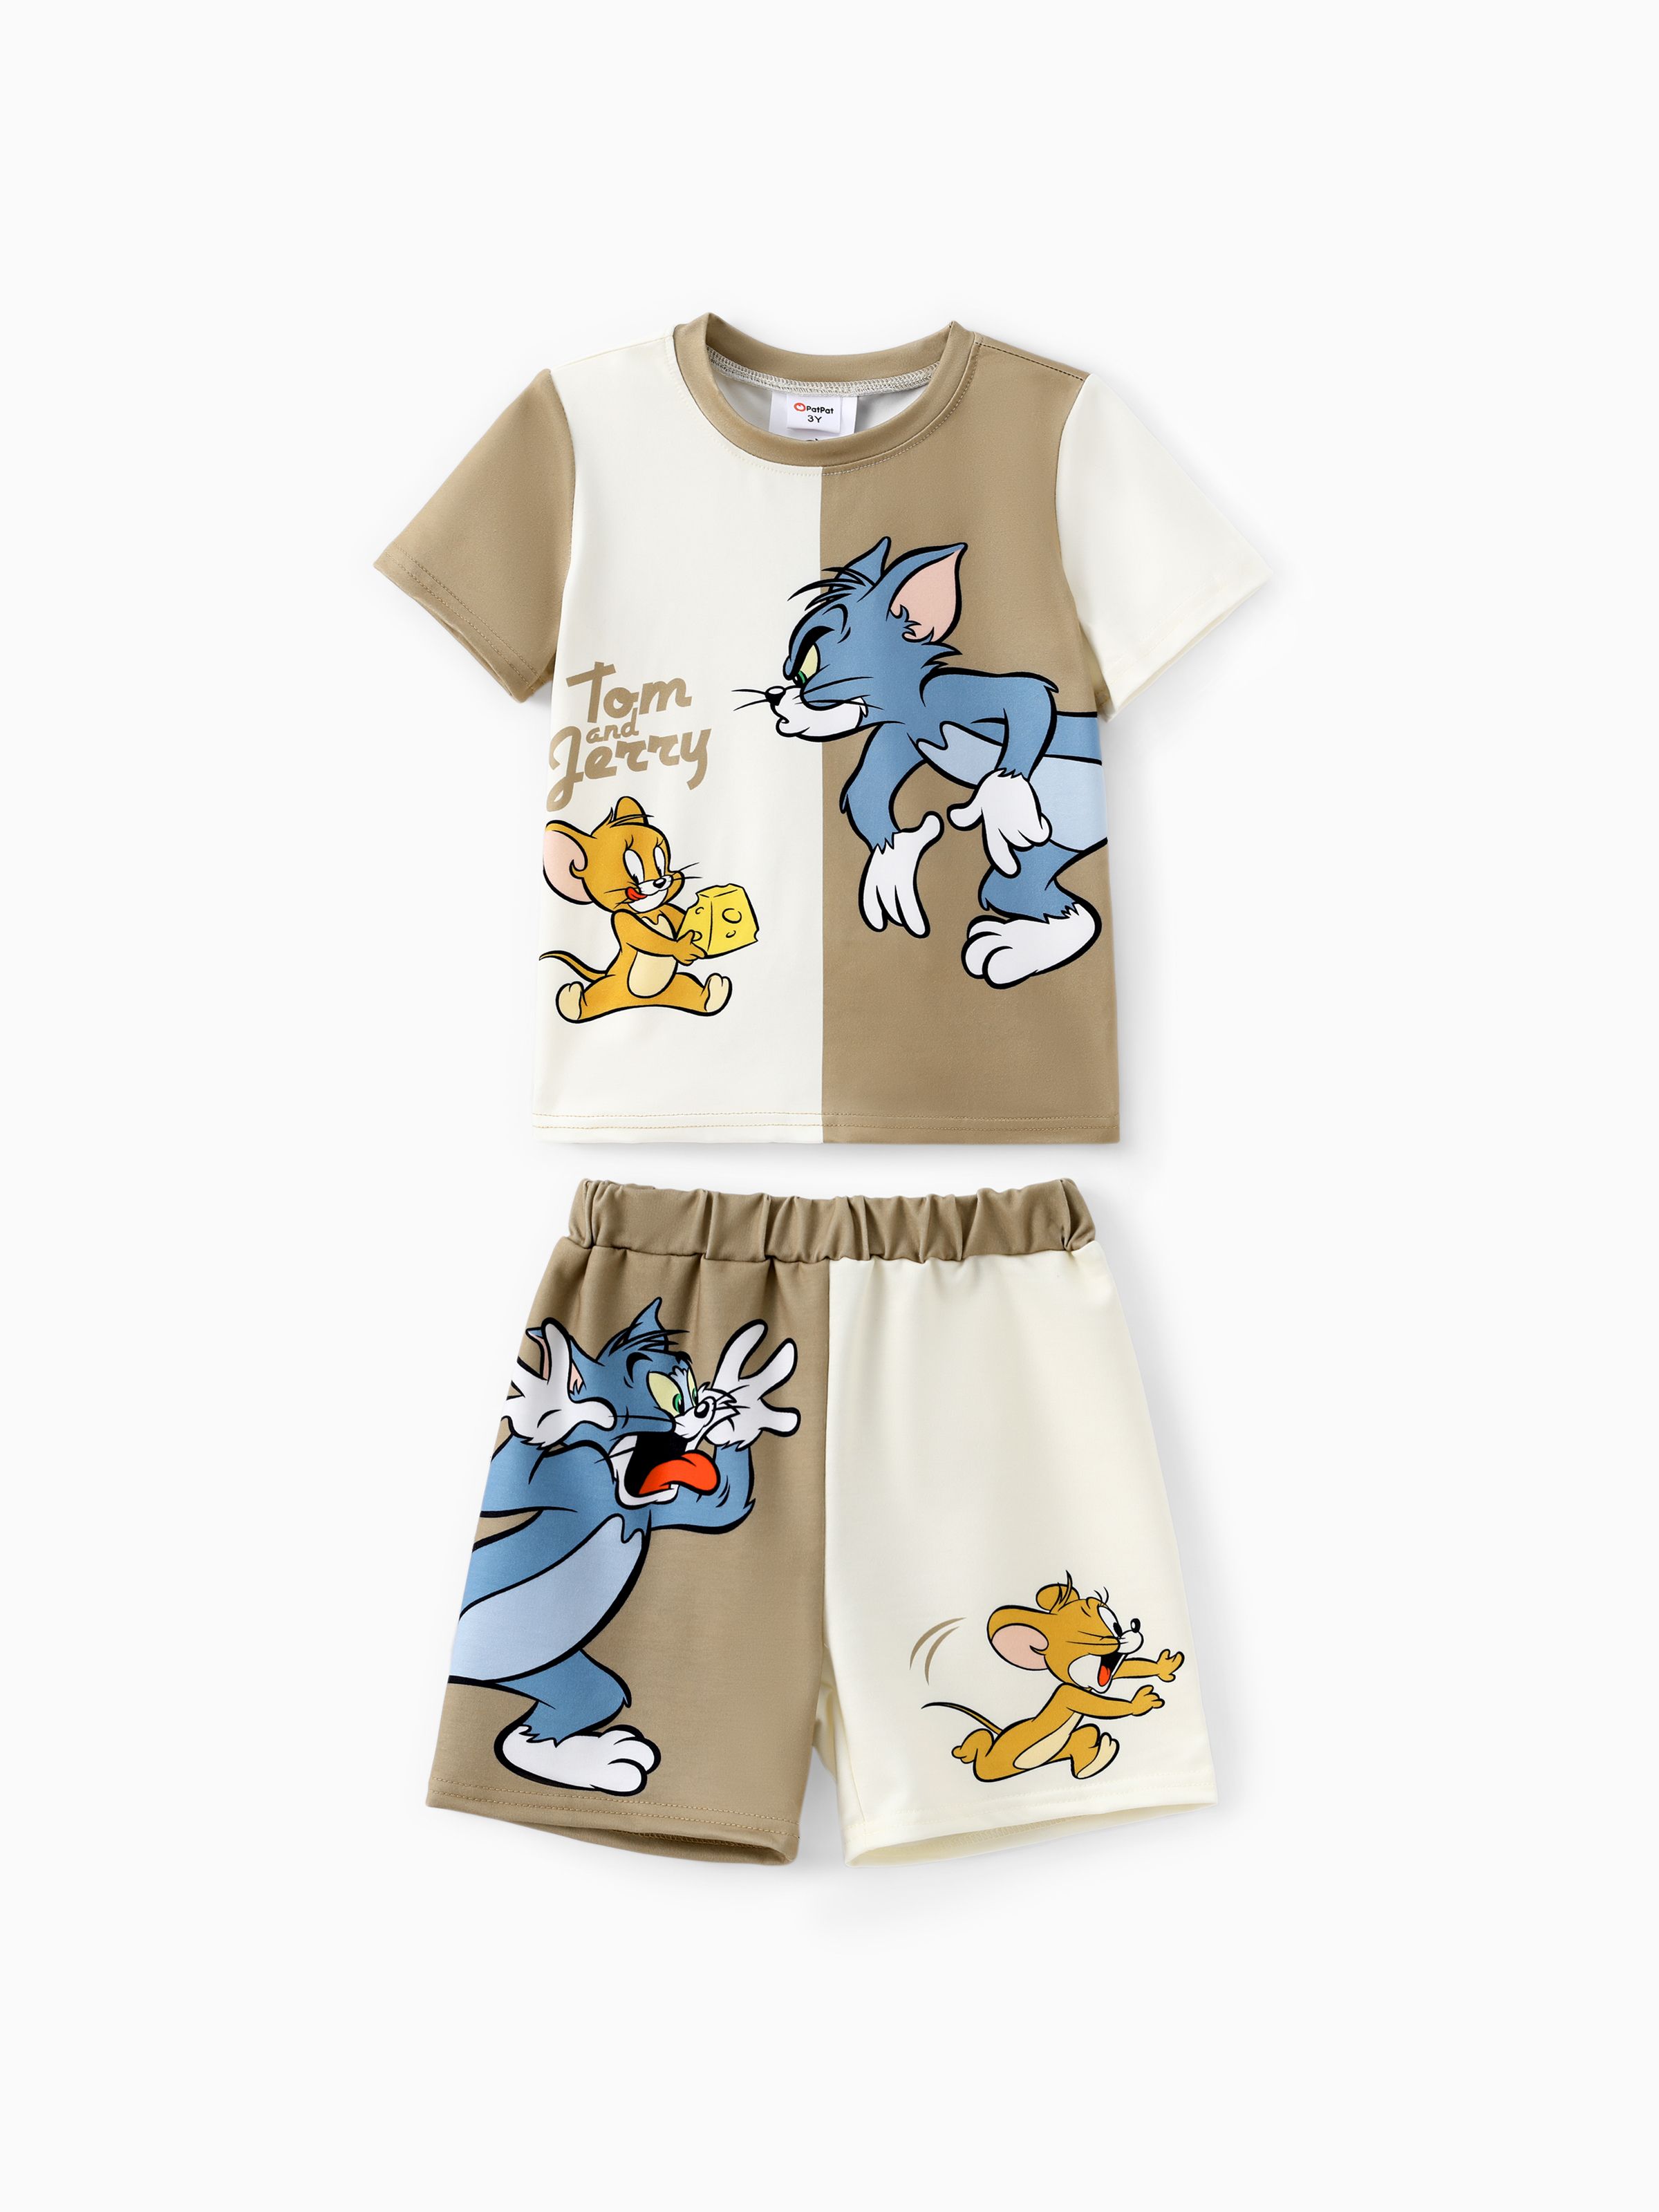 

Tom and Jerry Toddler Boys 2pcs Colorblock Funny Character Print Tee and Shorts Set